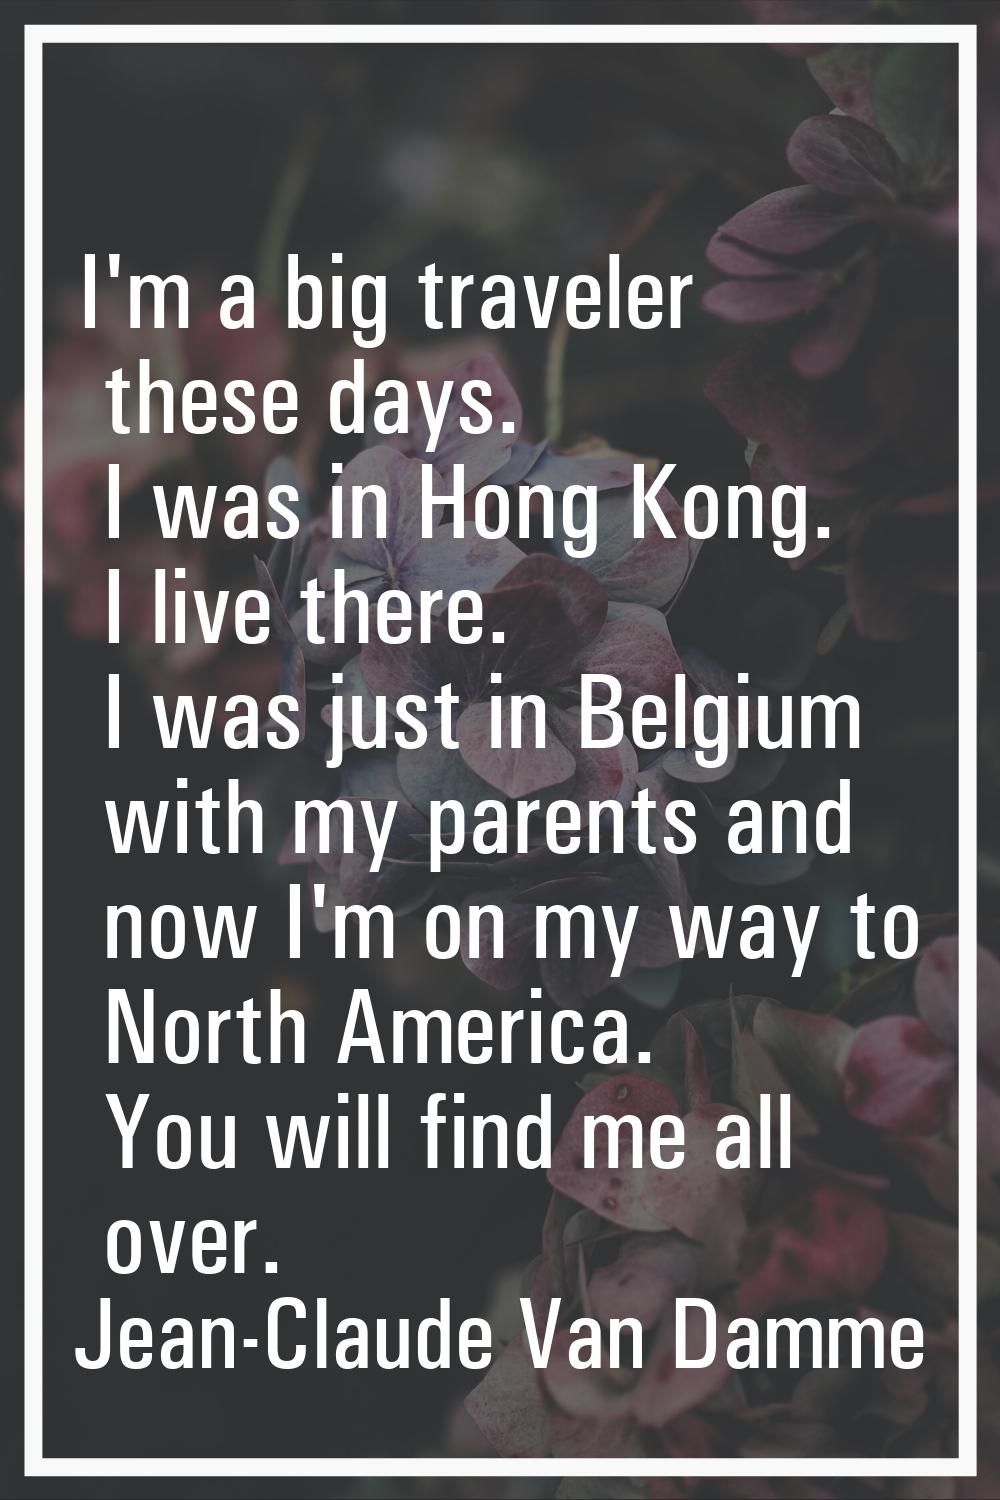 I'm a big traveler these days. I was in Hong Kong. I live there. I was just in Belgium with my pare